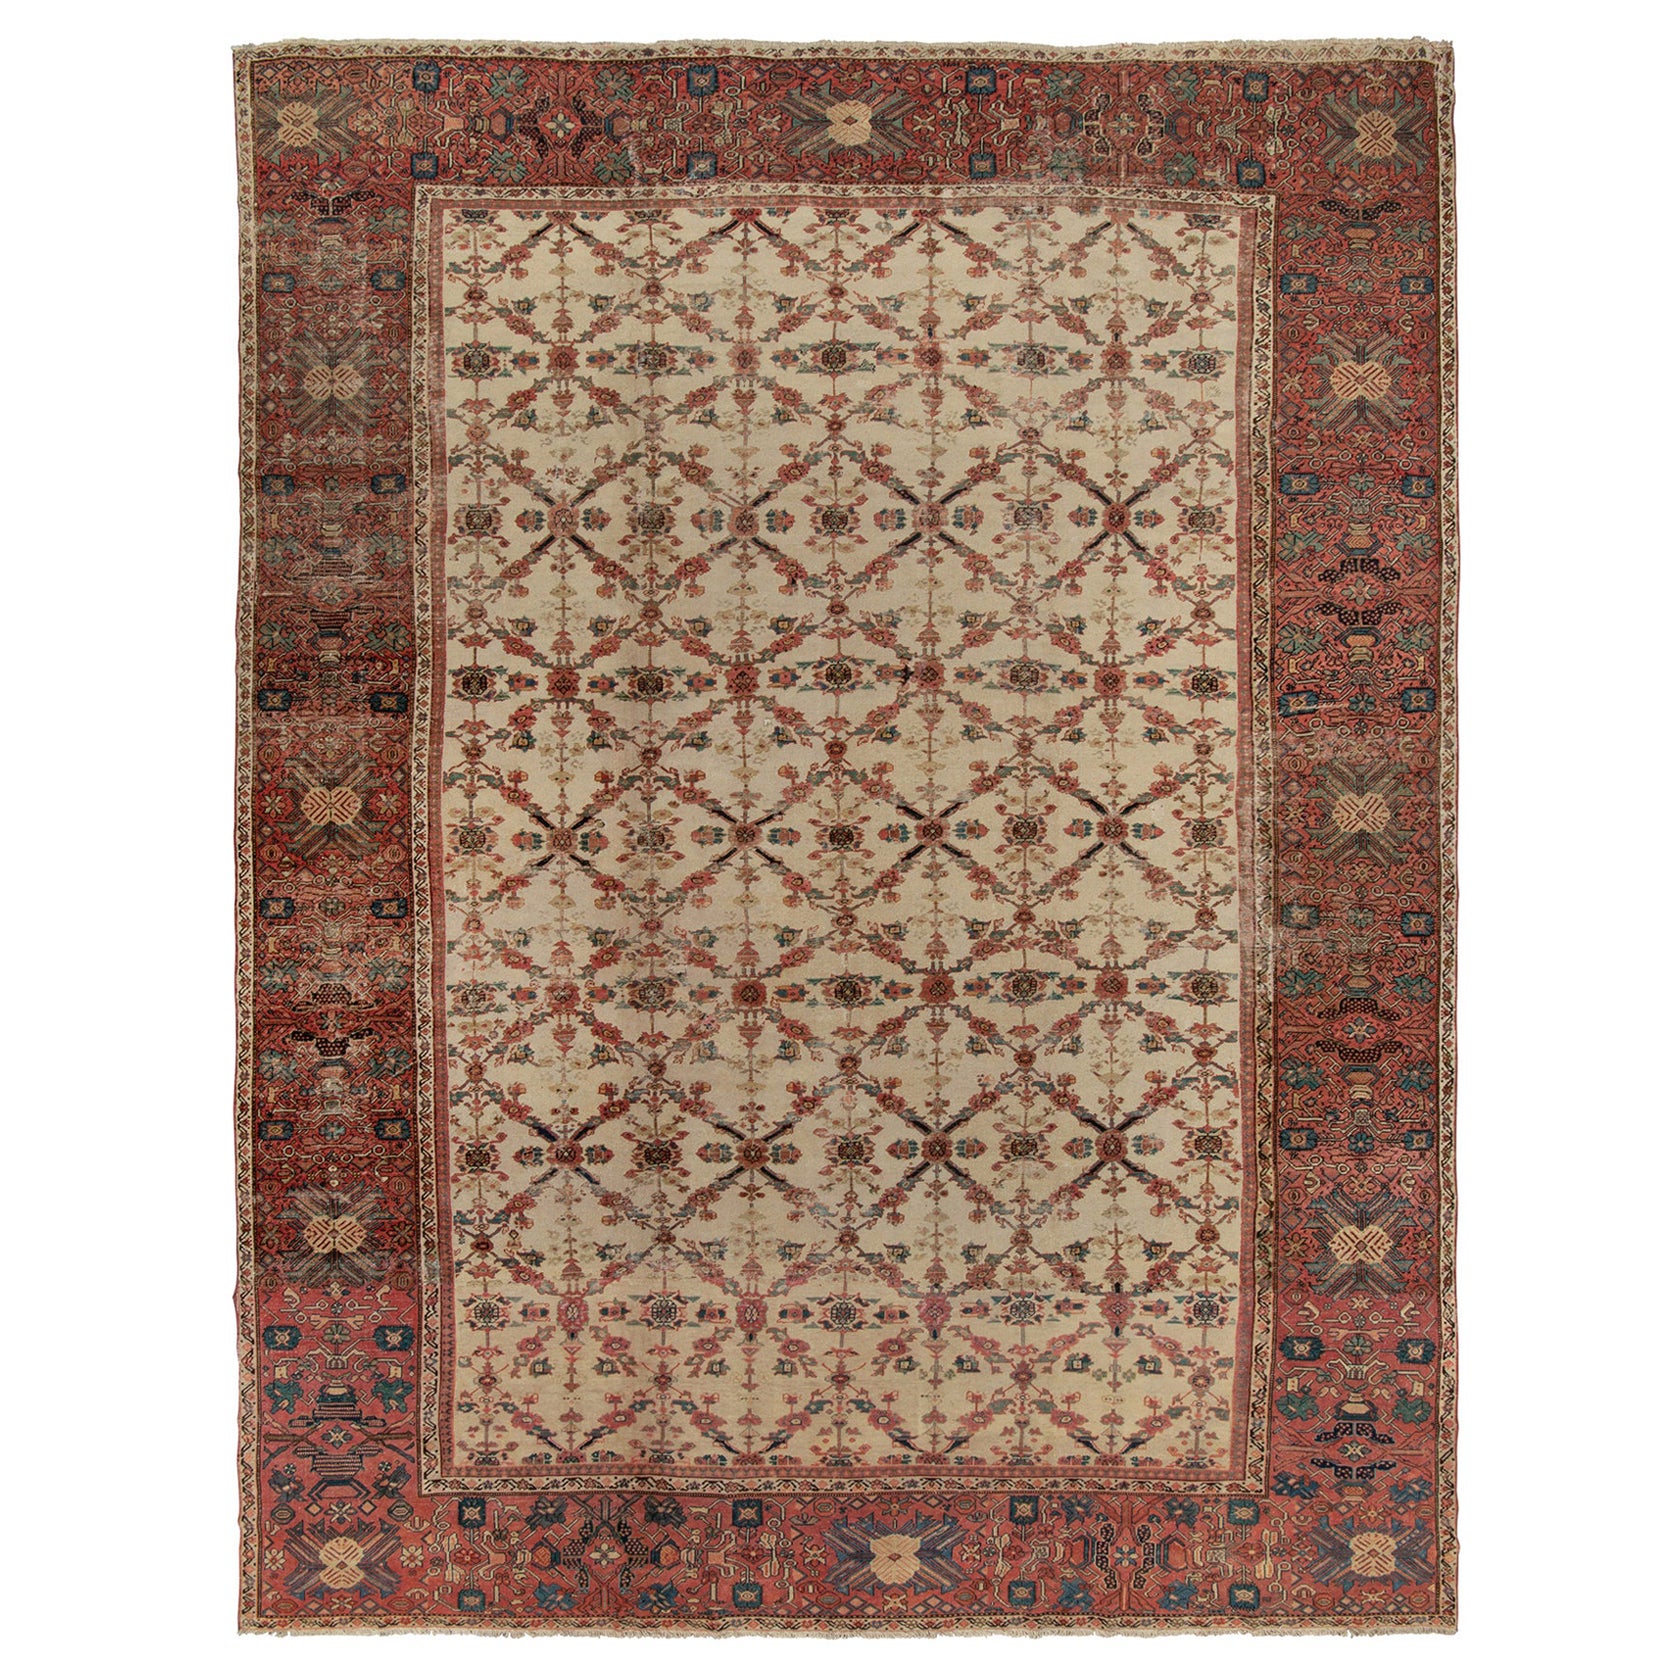 Antique Persian Sultanabad Rug in Beige and Red Floral Patterns For Sale